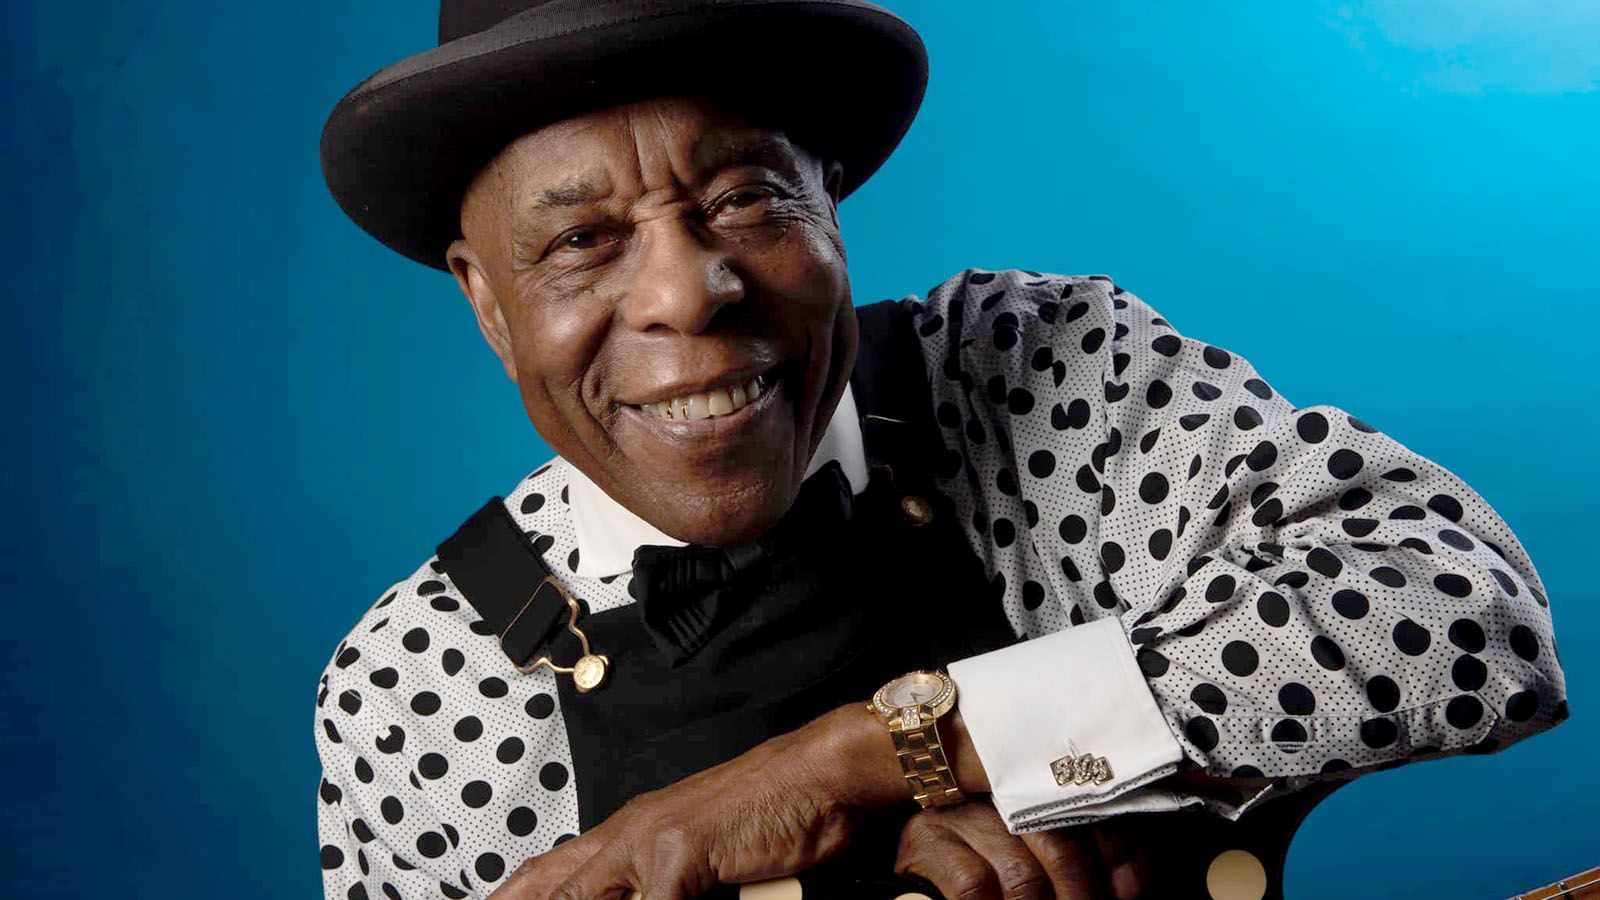 Buddy Guy will perform at Embassy Theatre on Feb. 23.